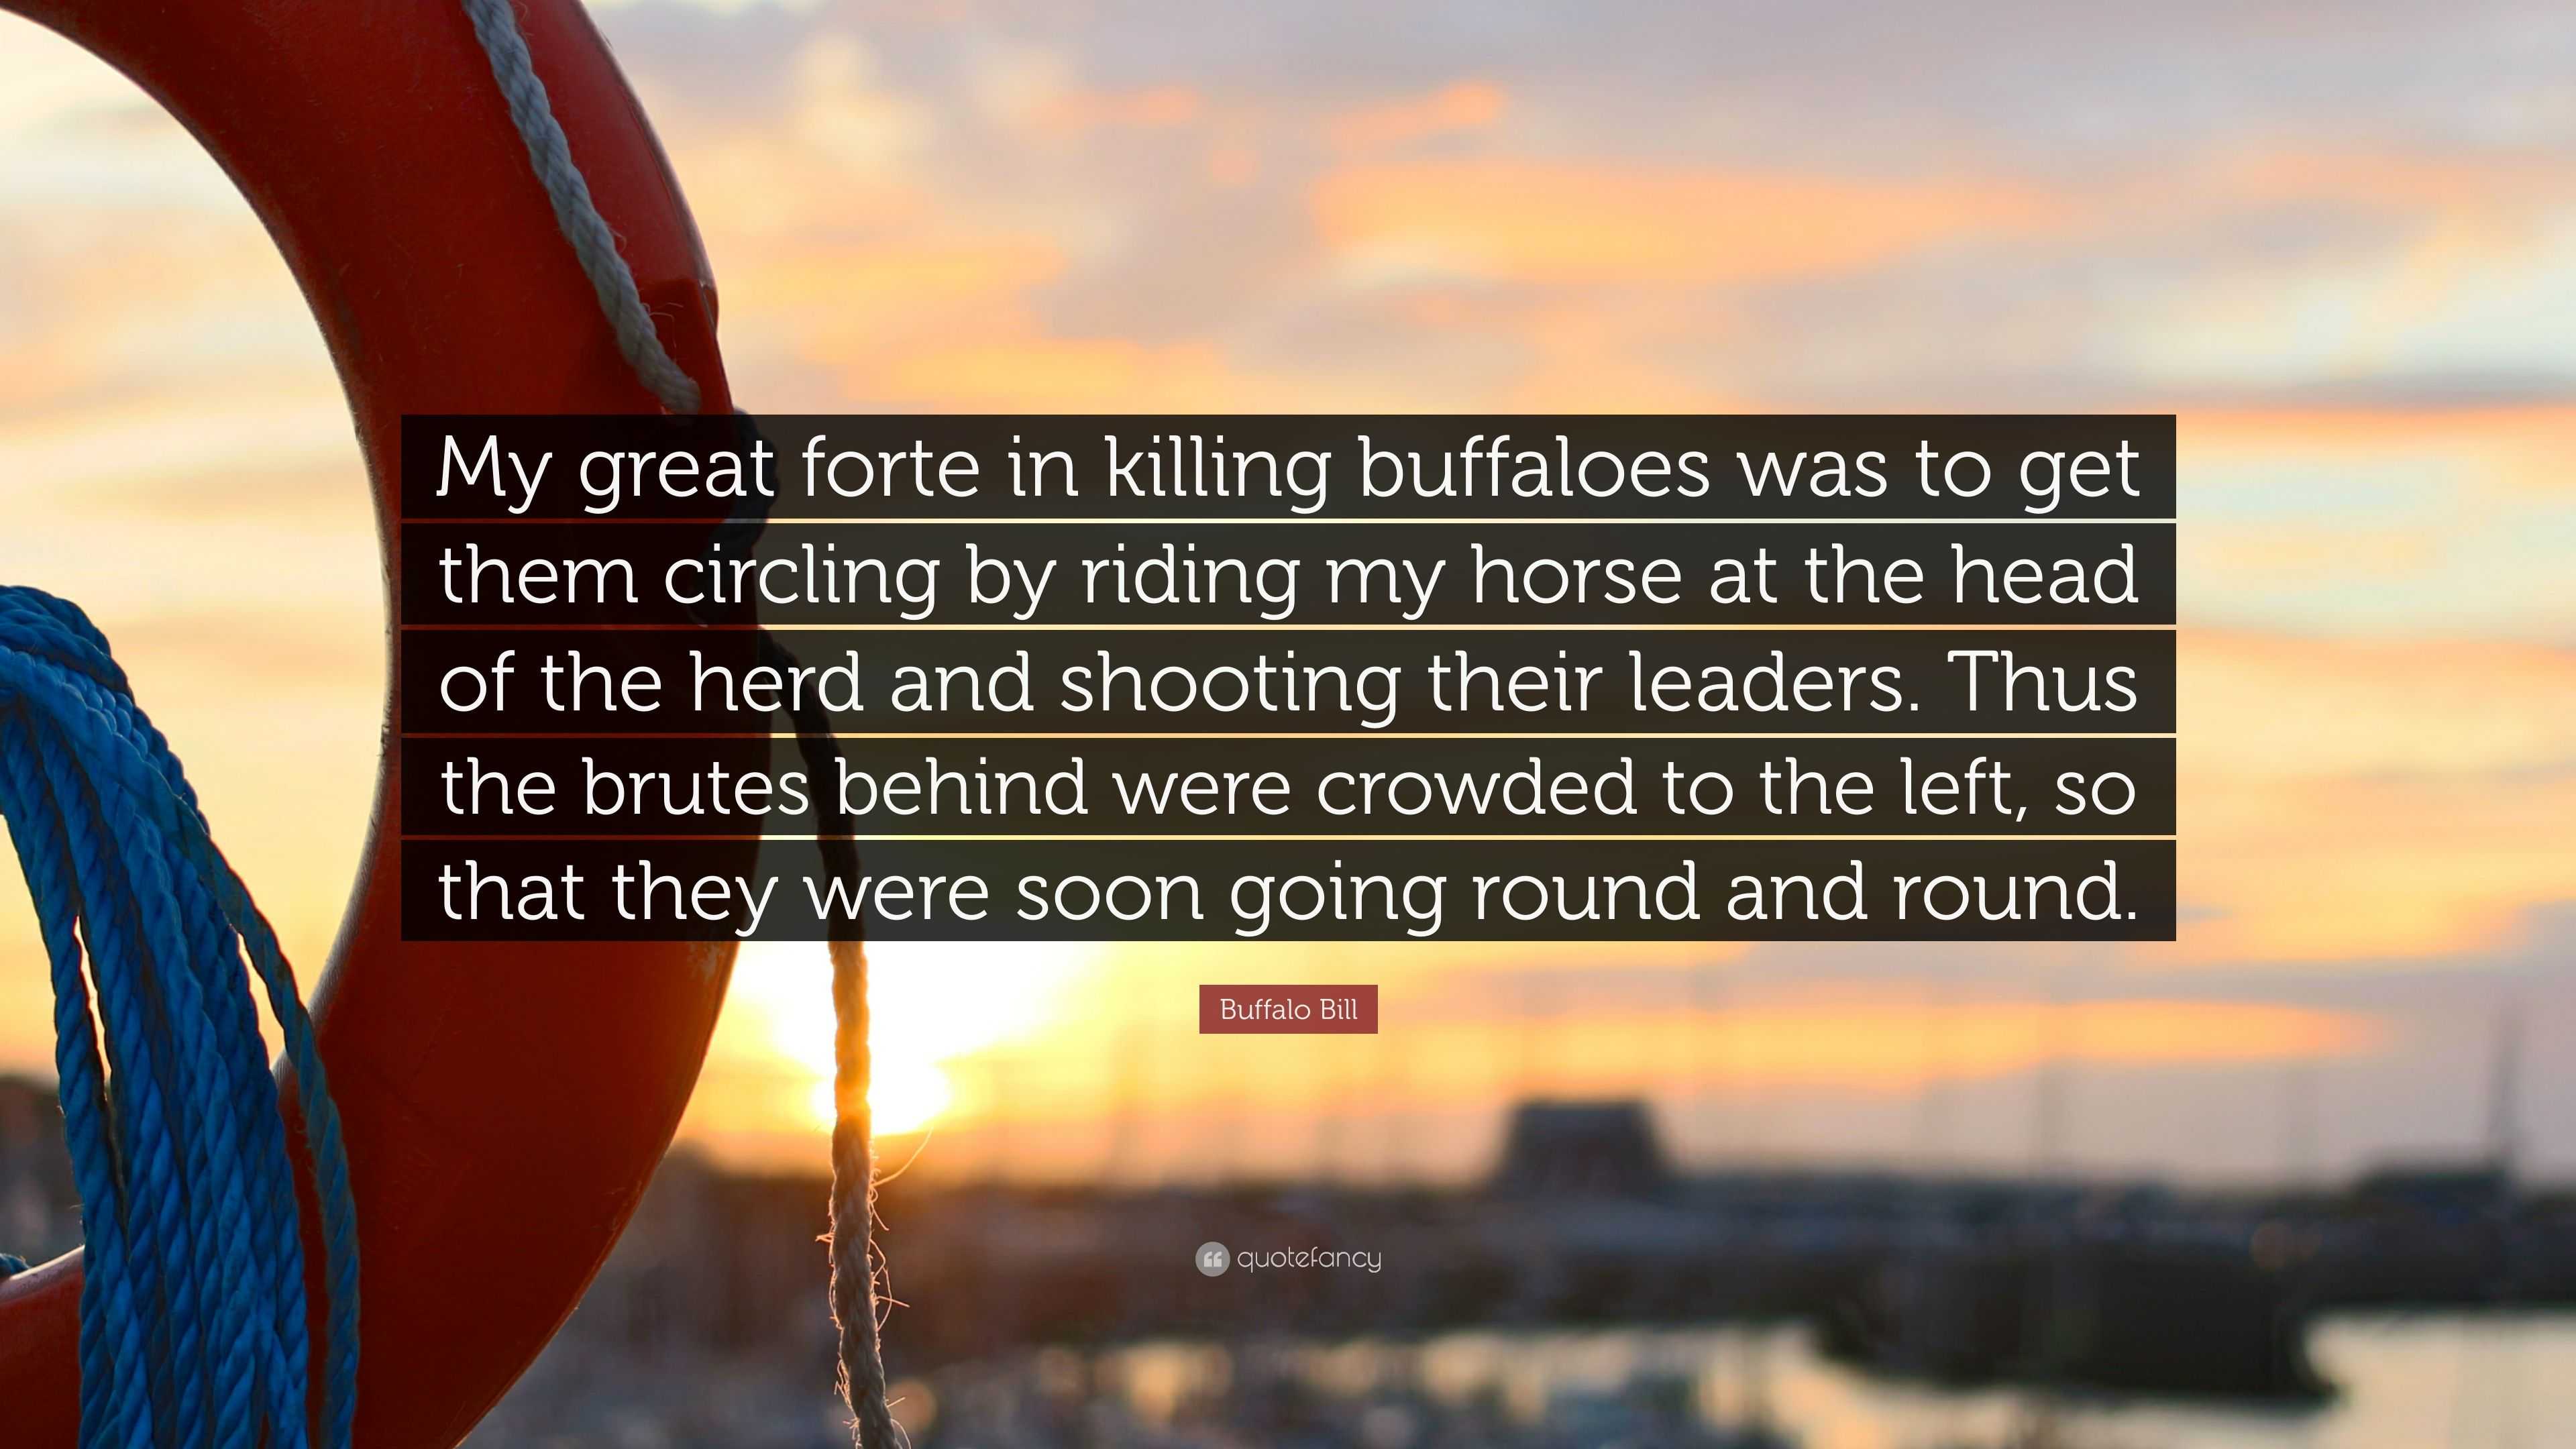 Buffalo Quote - Quotes About Buffalo Bill. QuotesGram - Making good